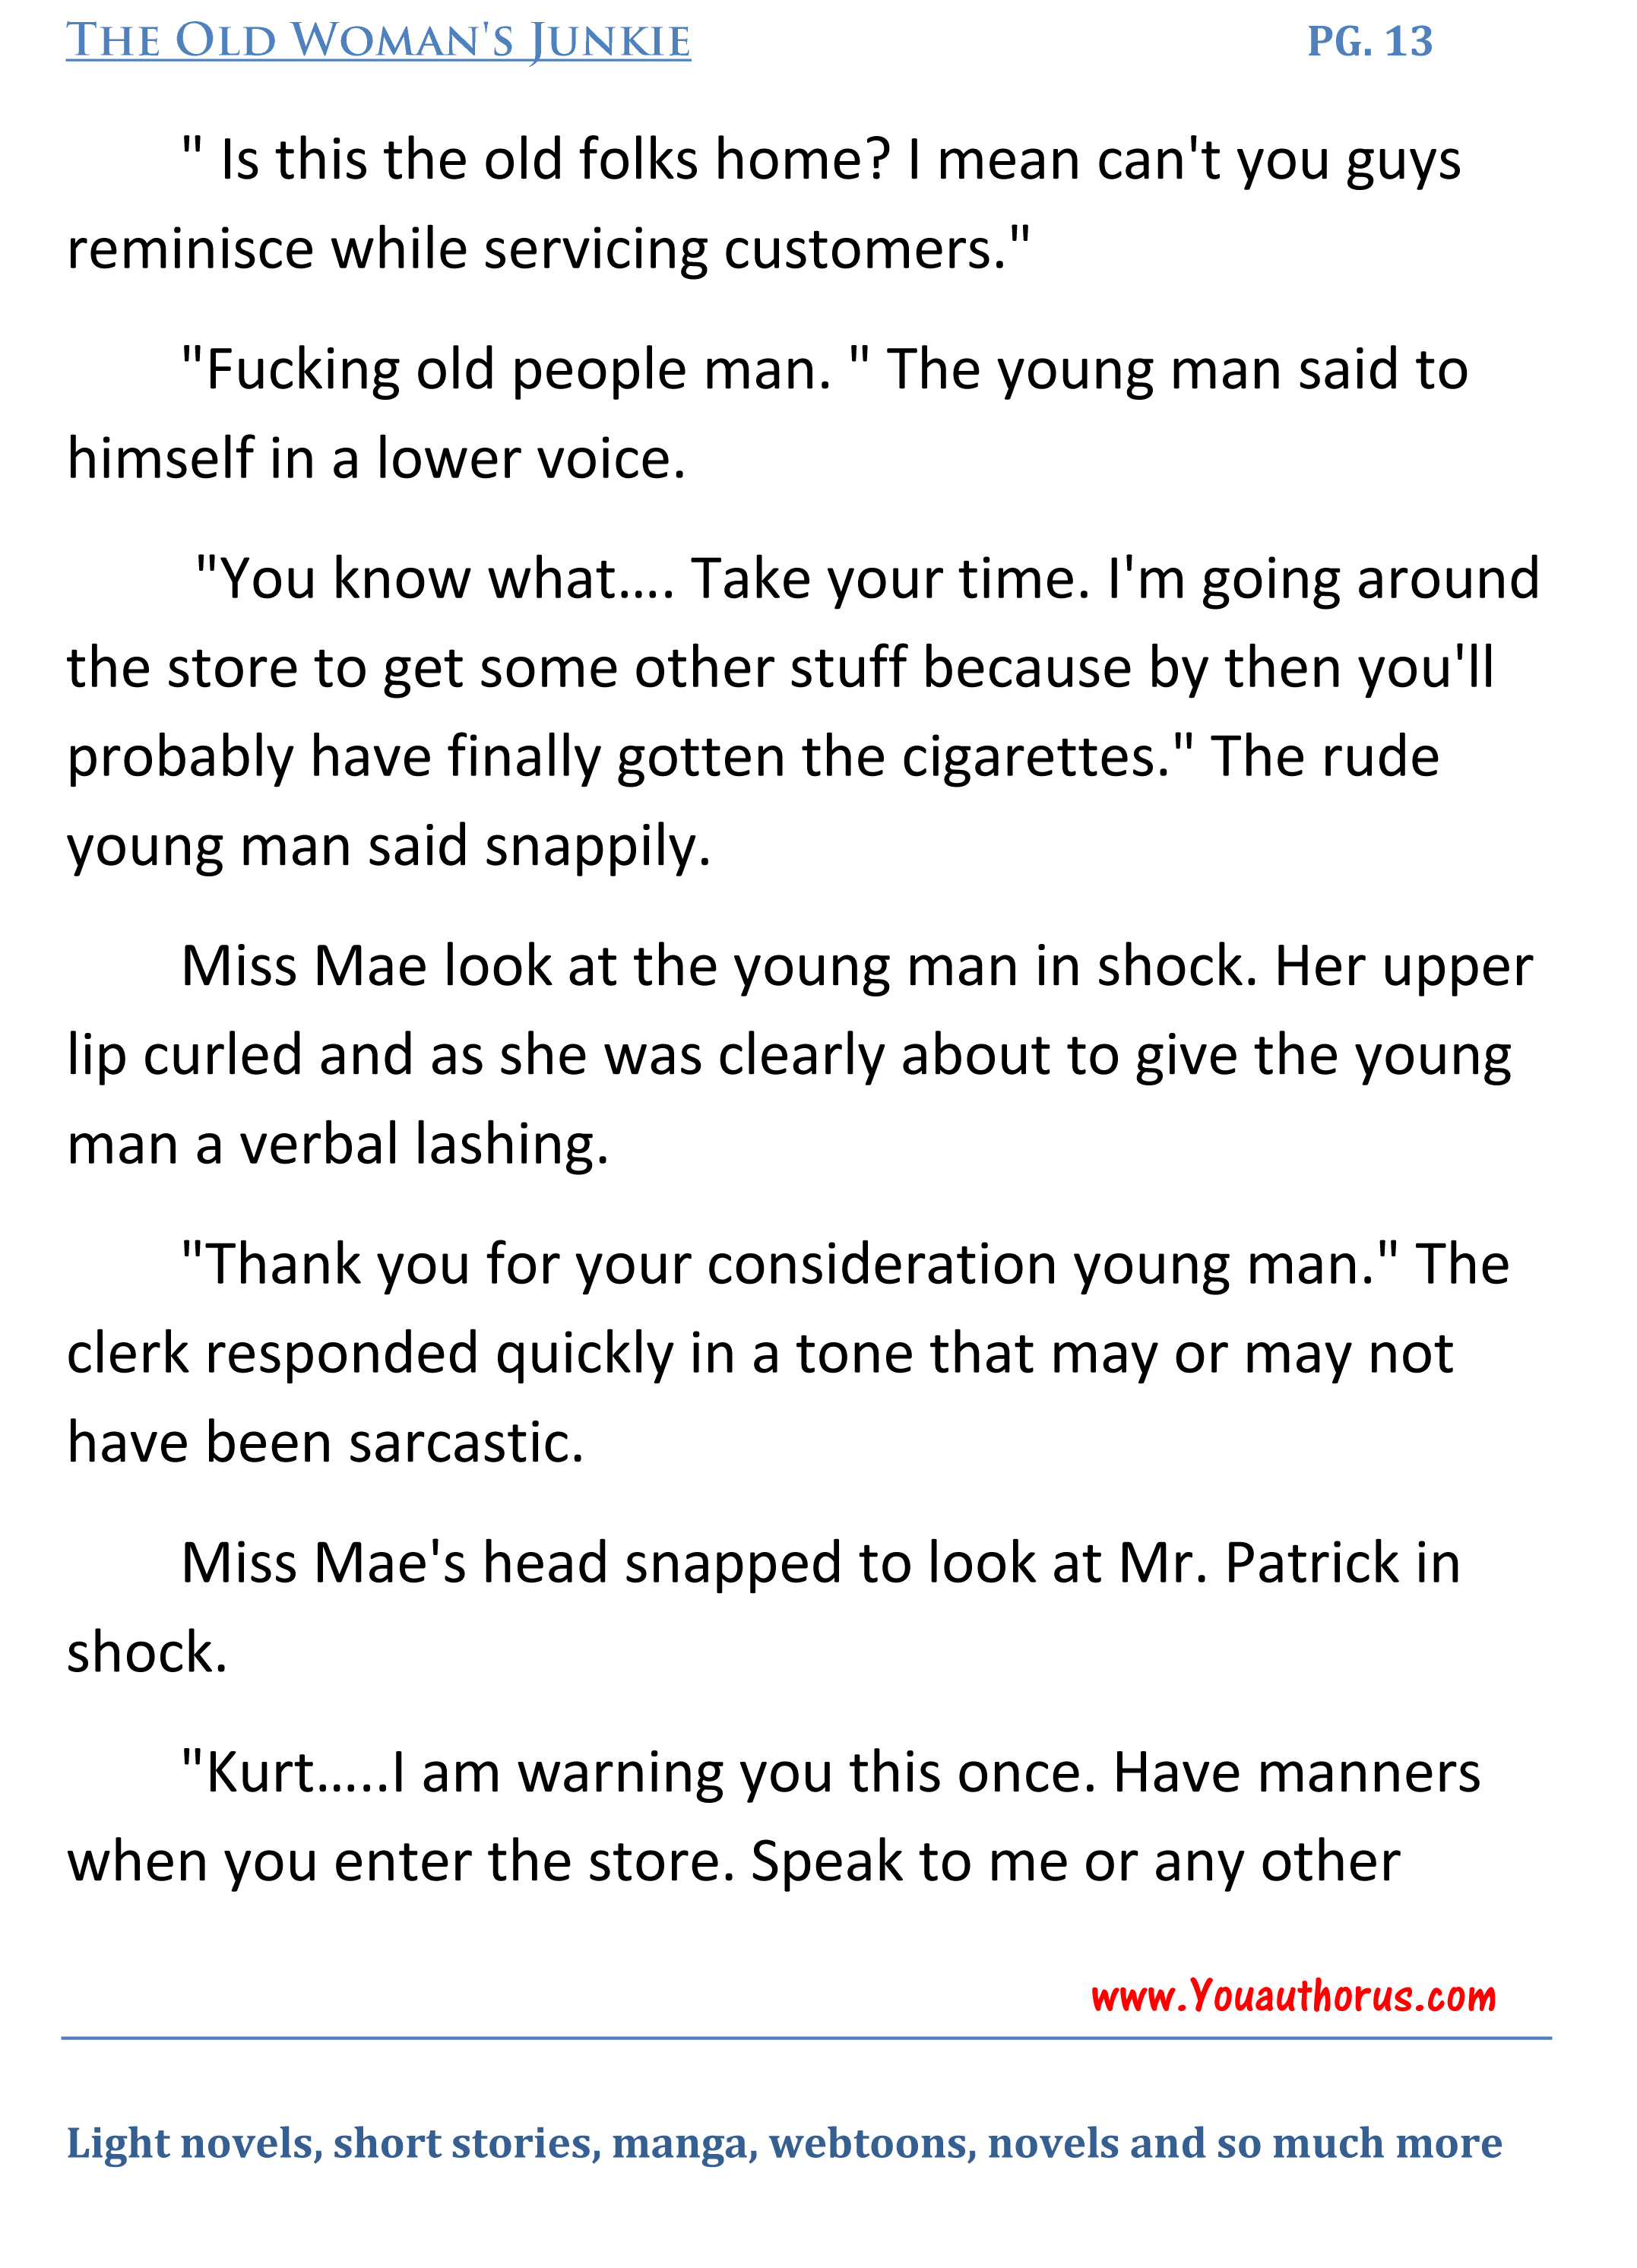 The Old Woman's Junkie(publishing 1)-13 copy